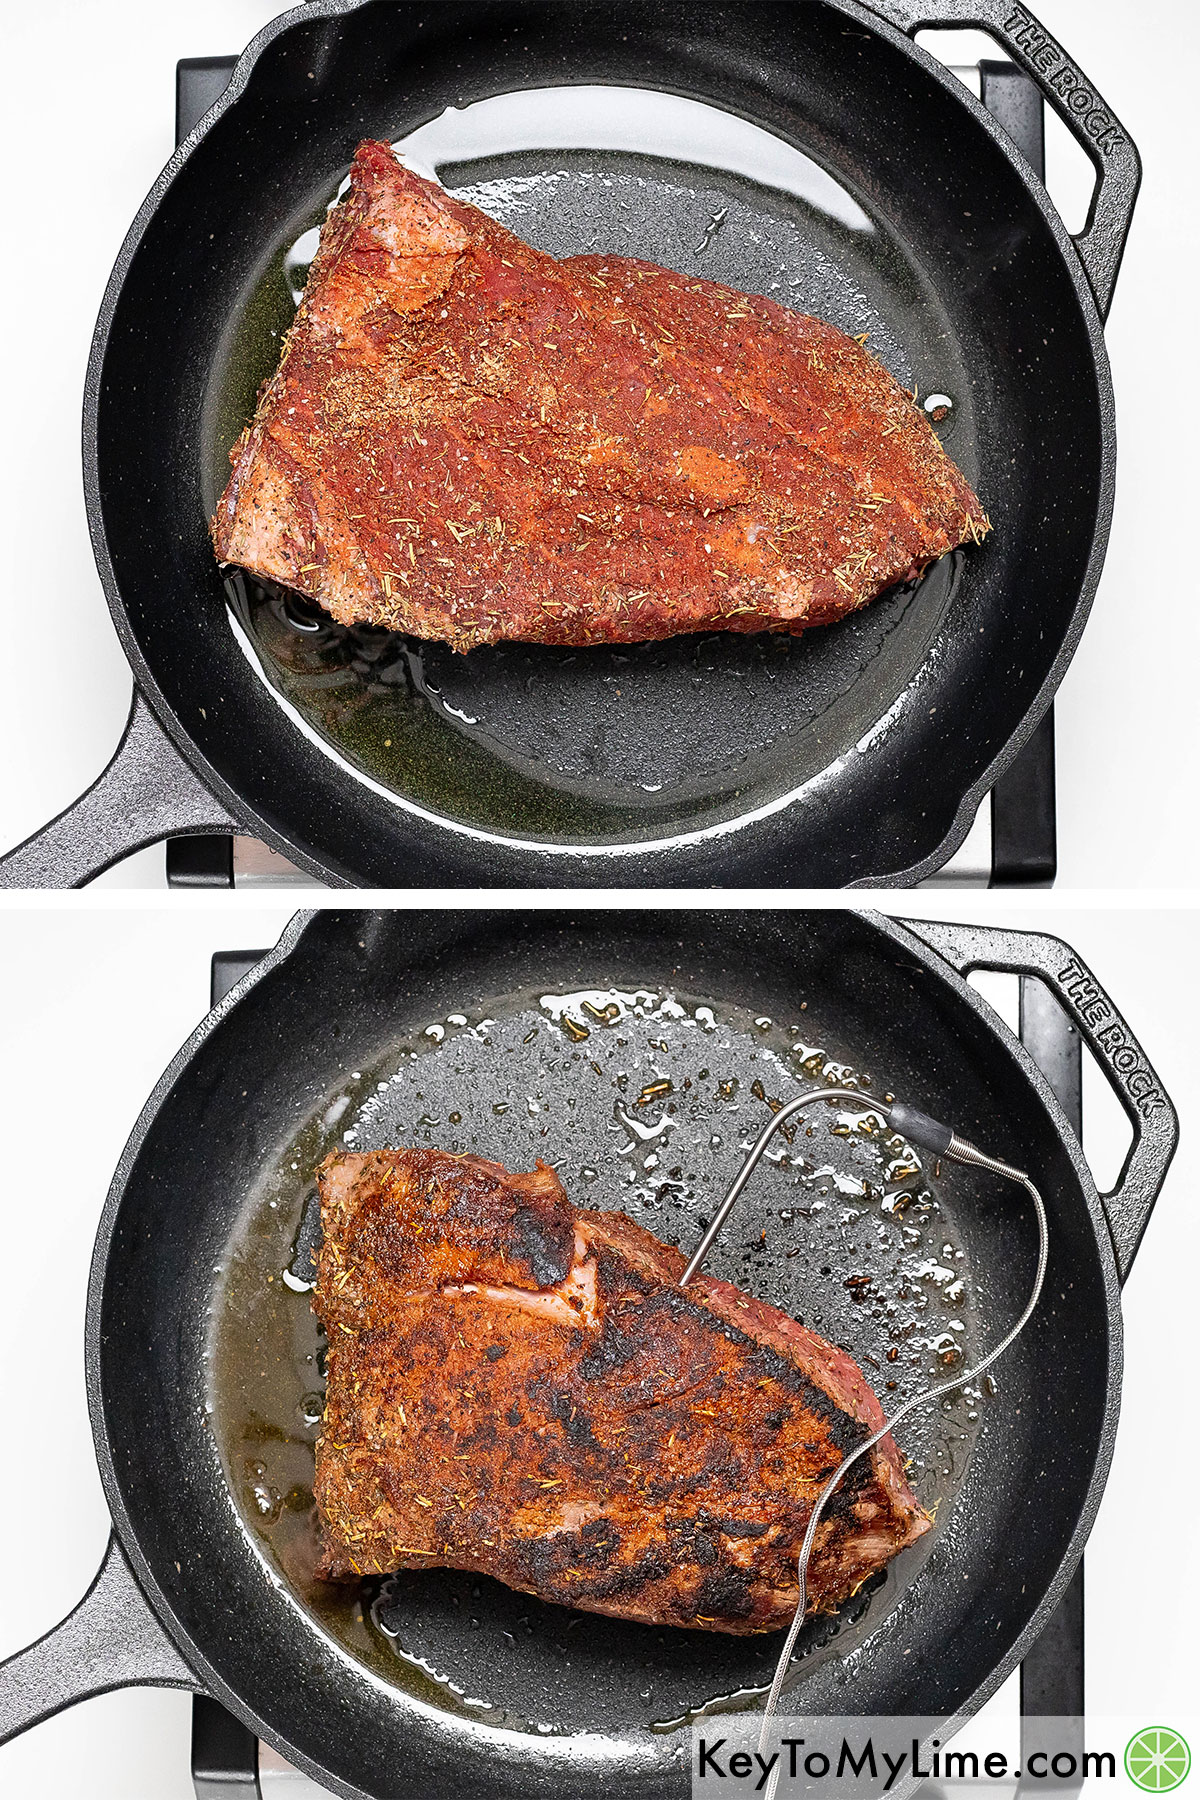 Searing the tri tip in a hot skillet, and then inserting an oven safe thermometer and baking.